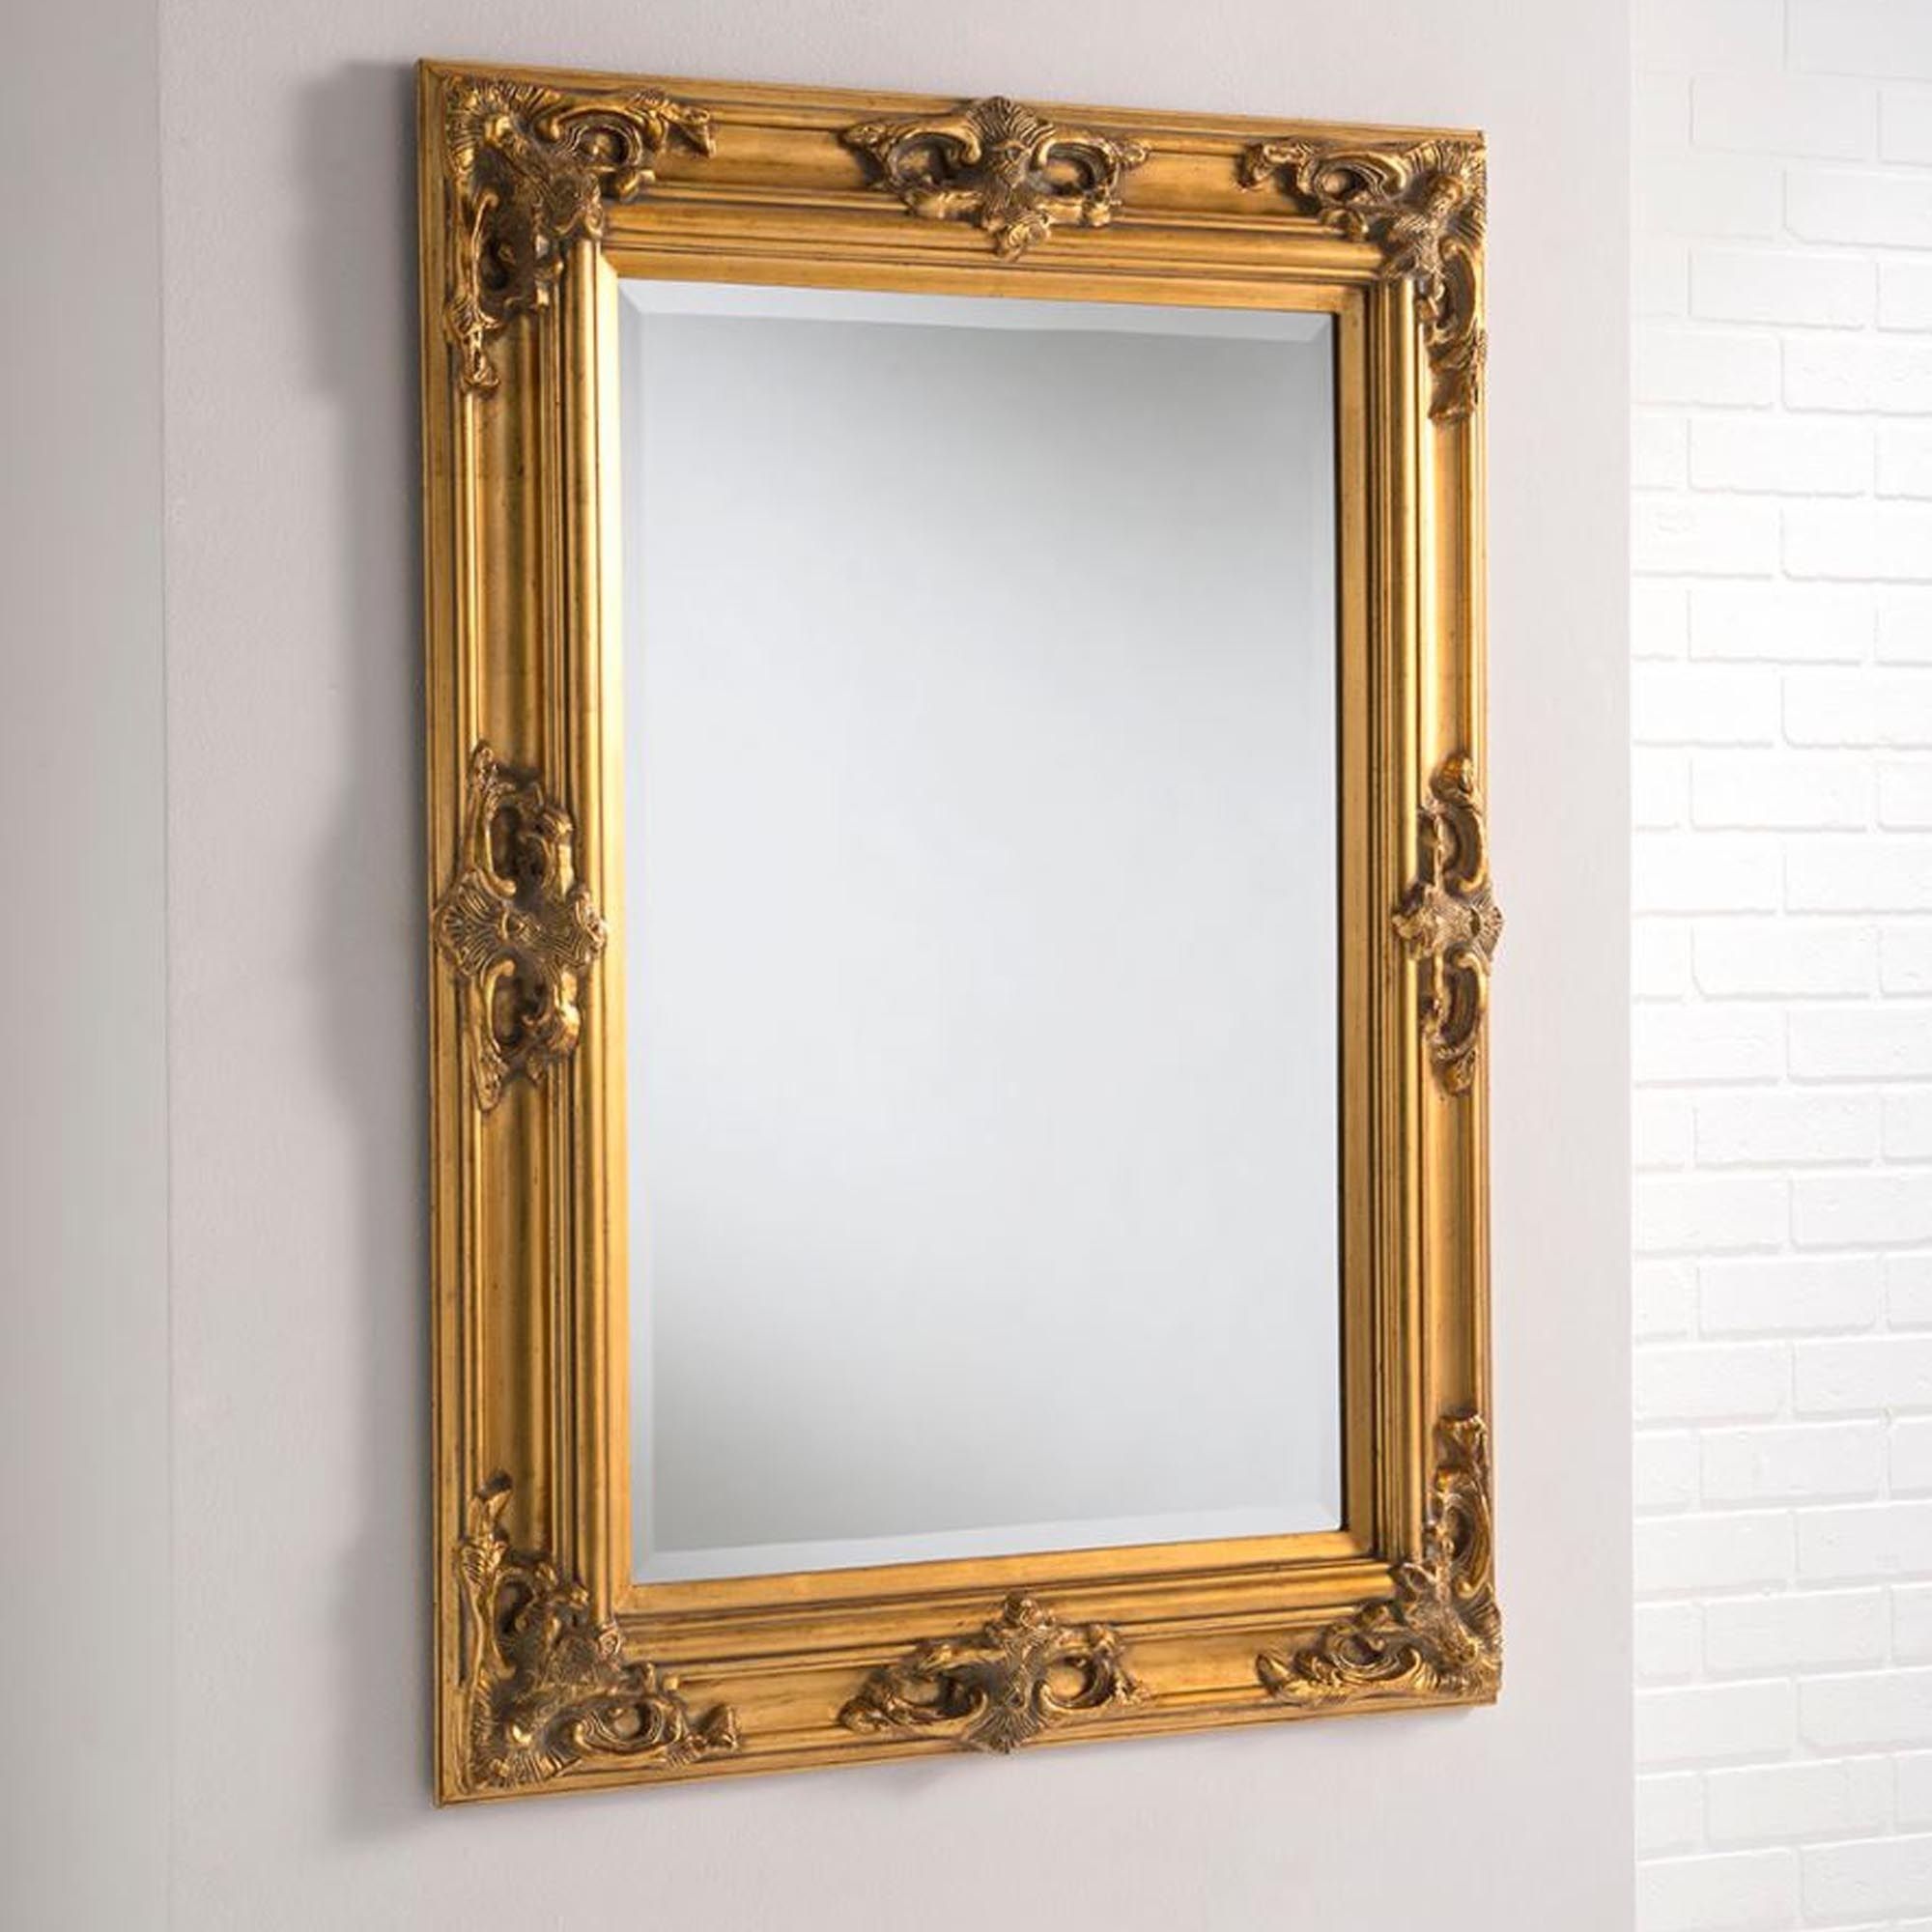 Tuscany Antique French Style Gold Wall Mirror | Homesdirect365 With Regard To Antiqued Glass Wall Mirrors (View 4 of 15)